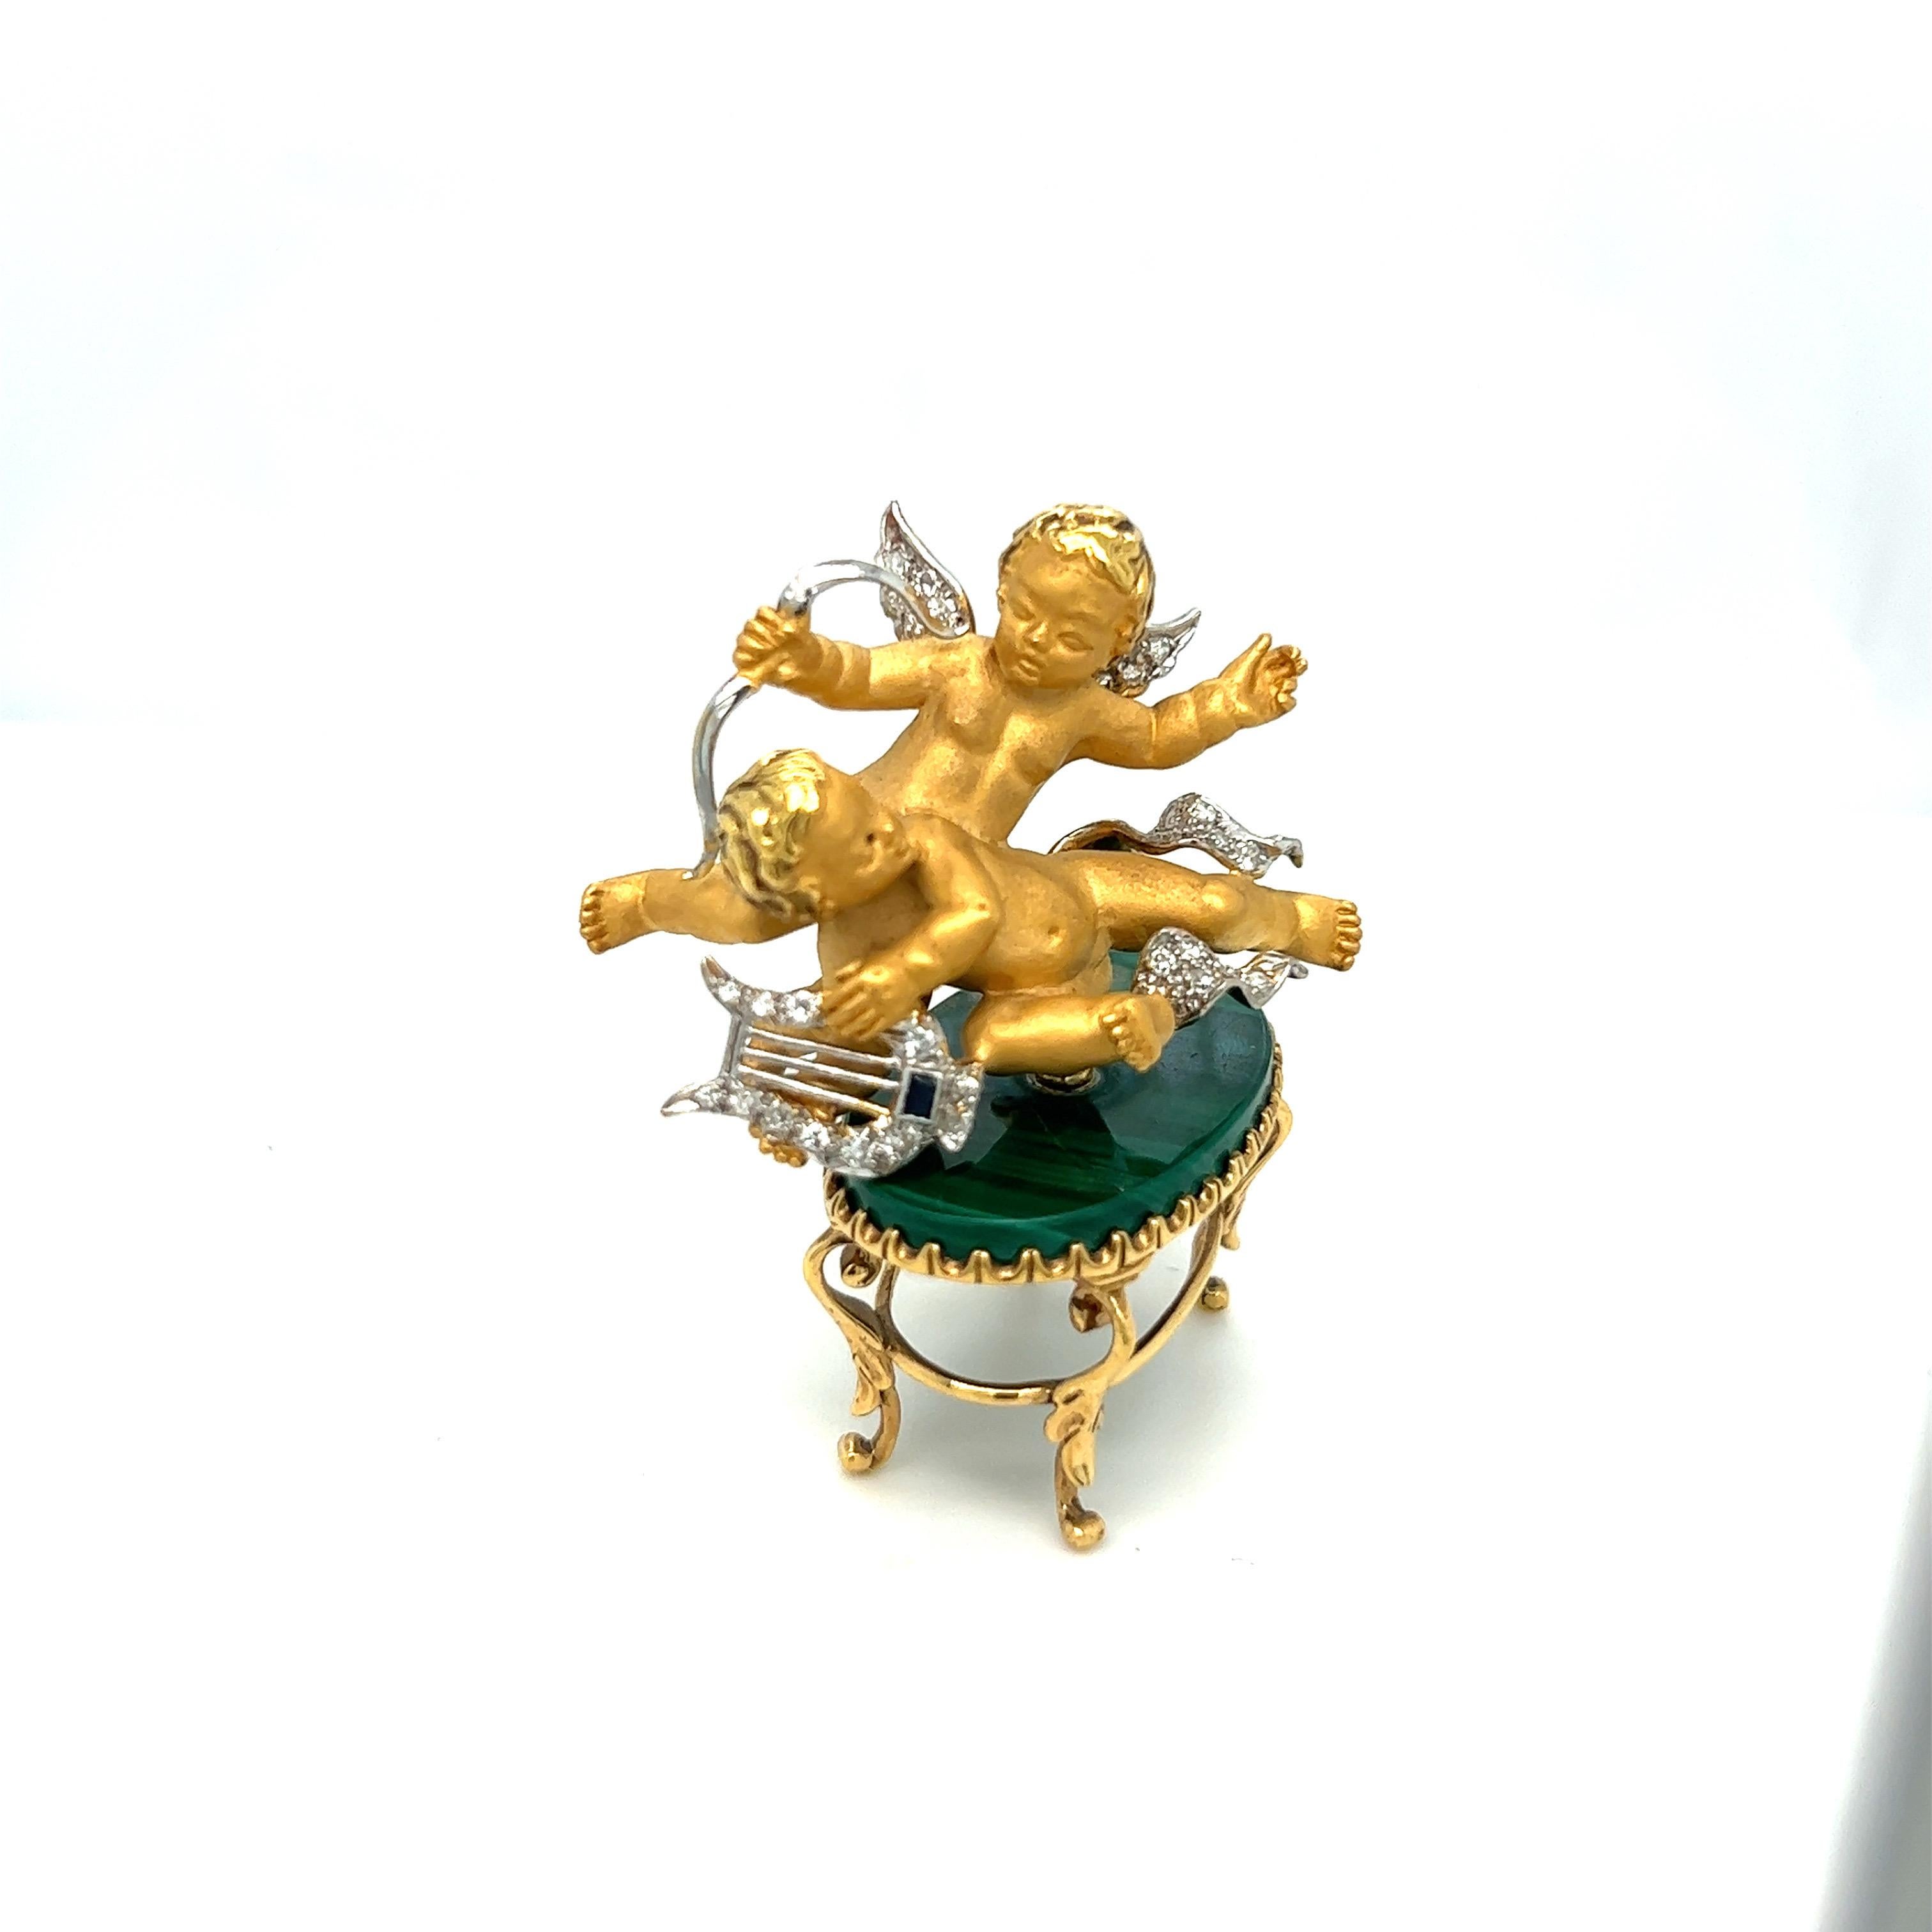 Carrera Y Carrera has built its famous name on figurative designs, an obsession with surface finishes, and a compelling way of seeing beauty in art and nature. 
This magnificent 18 karat gold pendant is designed with twin 3 dimensional cherubs.